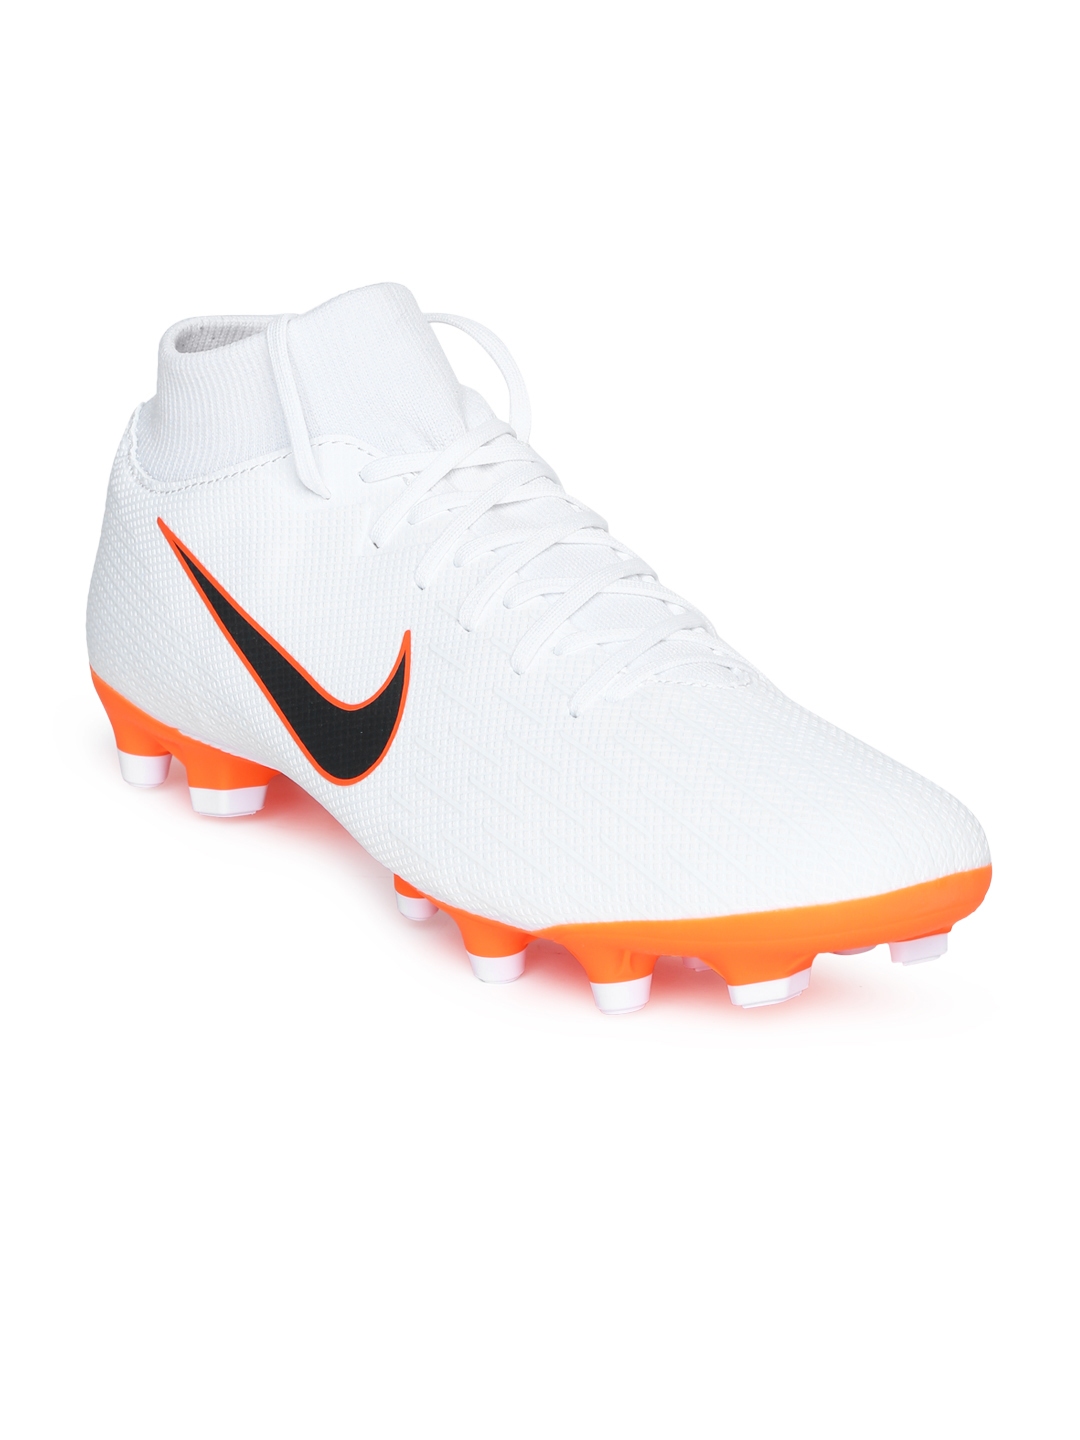 SUPERFLY 6 ACADEMY Football Shoes 